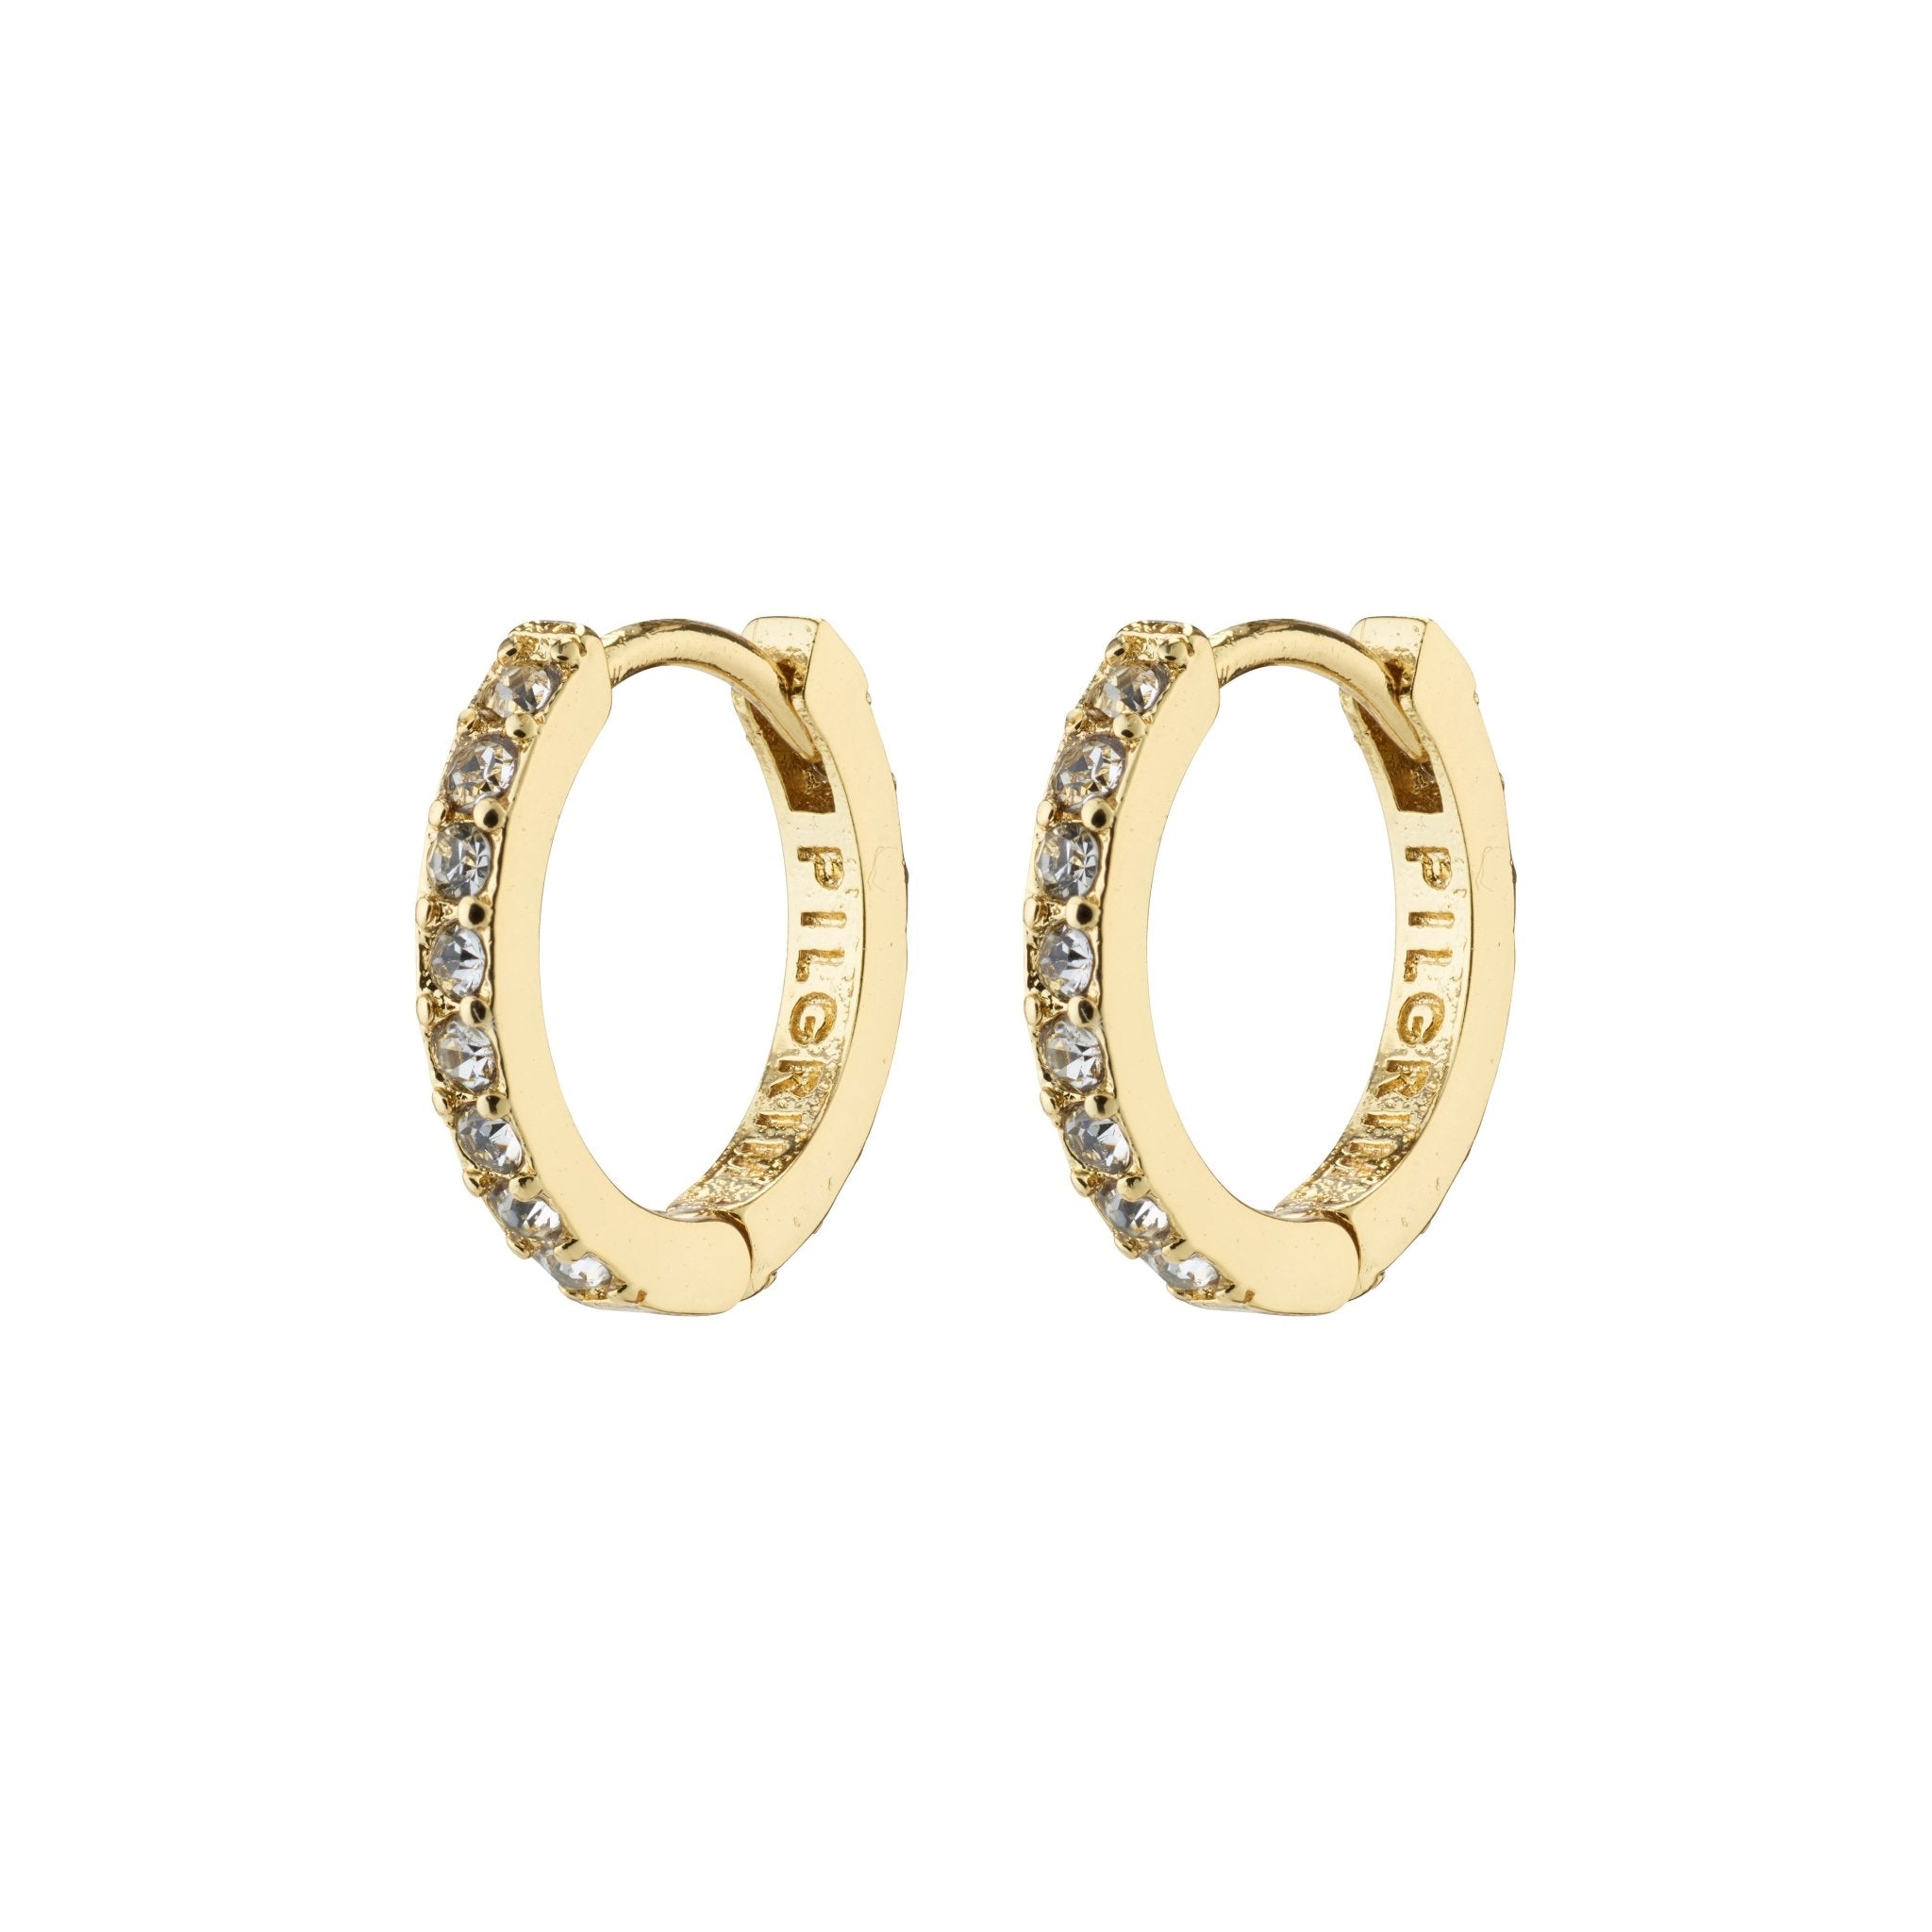 Cate & Chloe Charlie 18k Yellow Gold Plated Hoop Earrings with Crystals | Small  Crystal Hoops for Women, Round Ring Earrings - Walmart.com